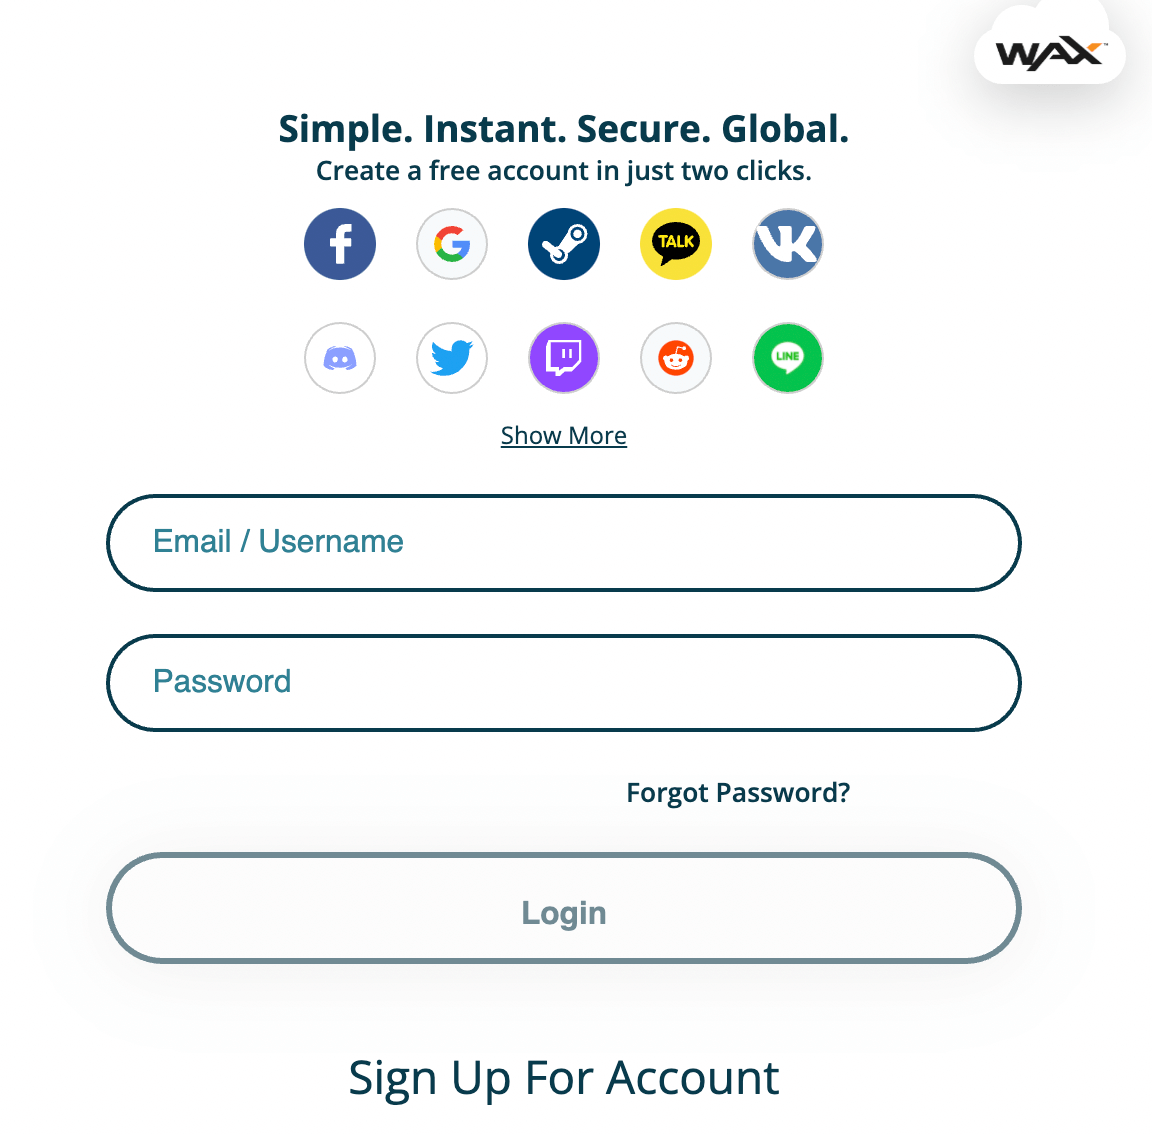 wax wallet login or sign up - 04